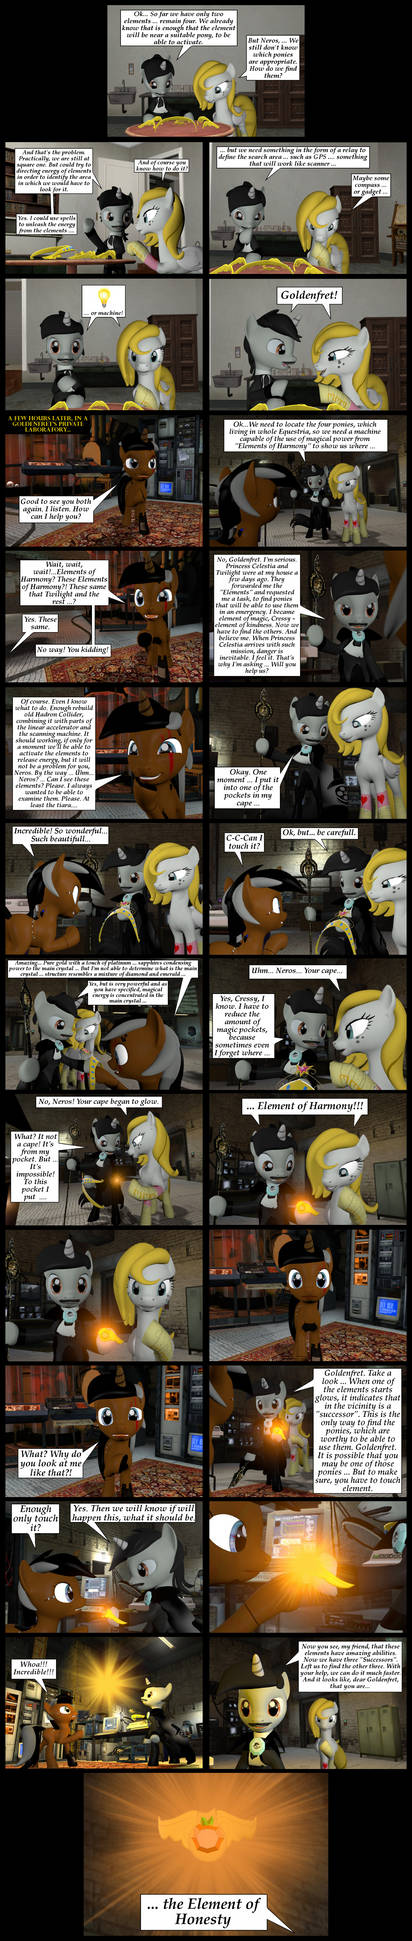 Successors of Harmony. - Page 3